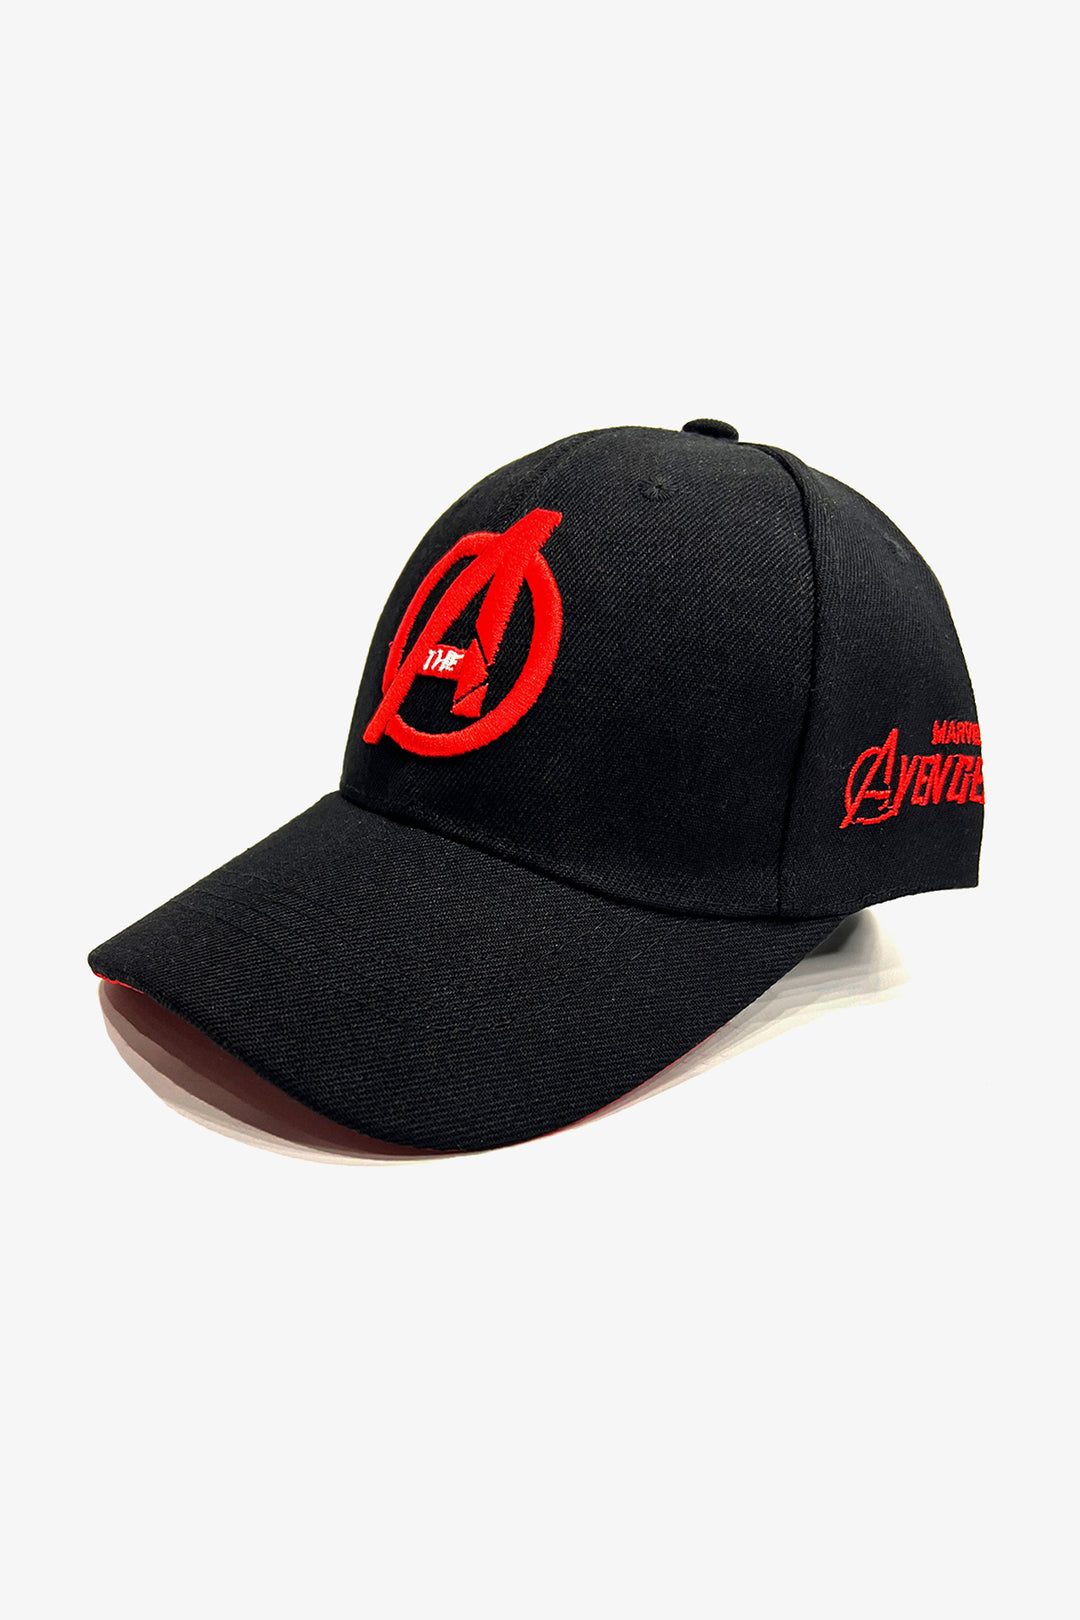 Black Avengers Red Embroidered Cap - S23 - MCP096R